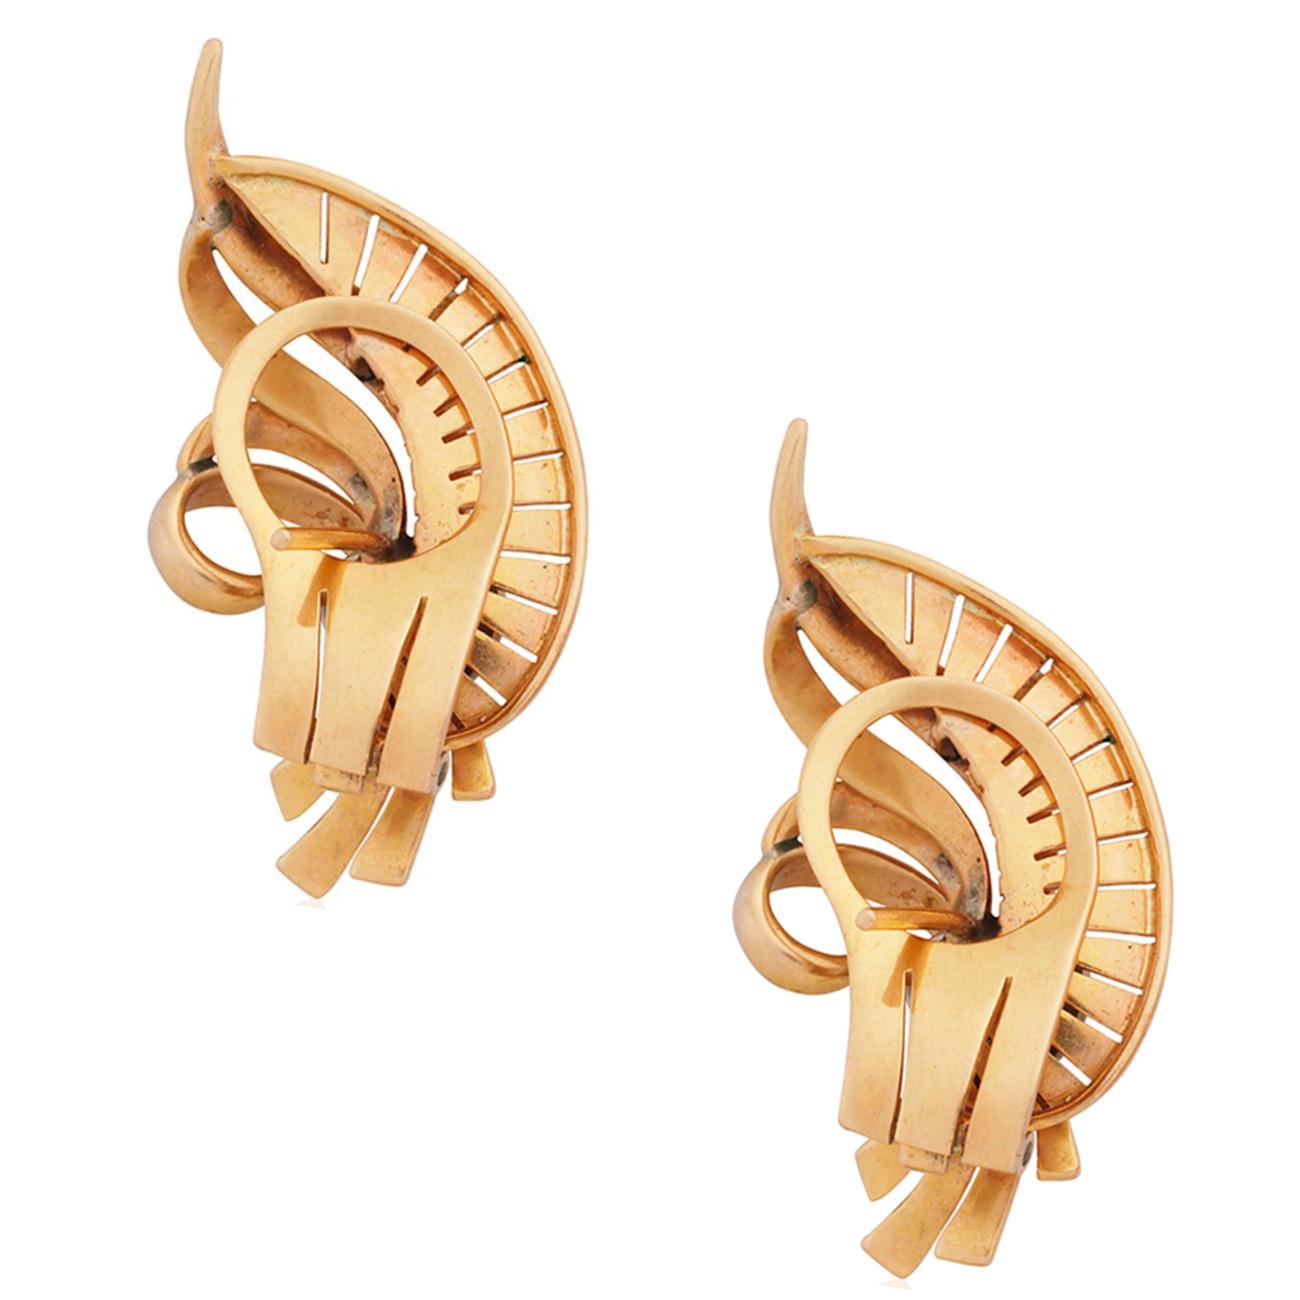 A curved pair of scroll earrings with 3 single-cut diamonds each. 14K White and Yellow Gold. Earring Size: L 3.5 x W 1.8 cm. Earring Back: French Clip.